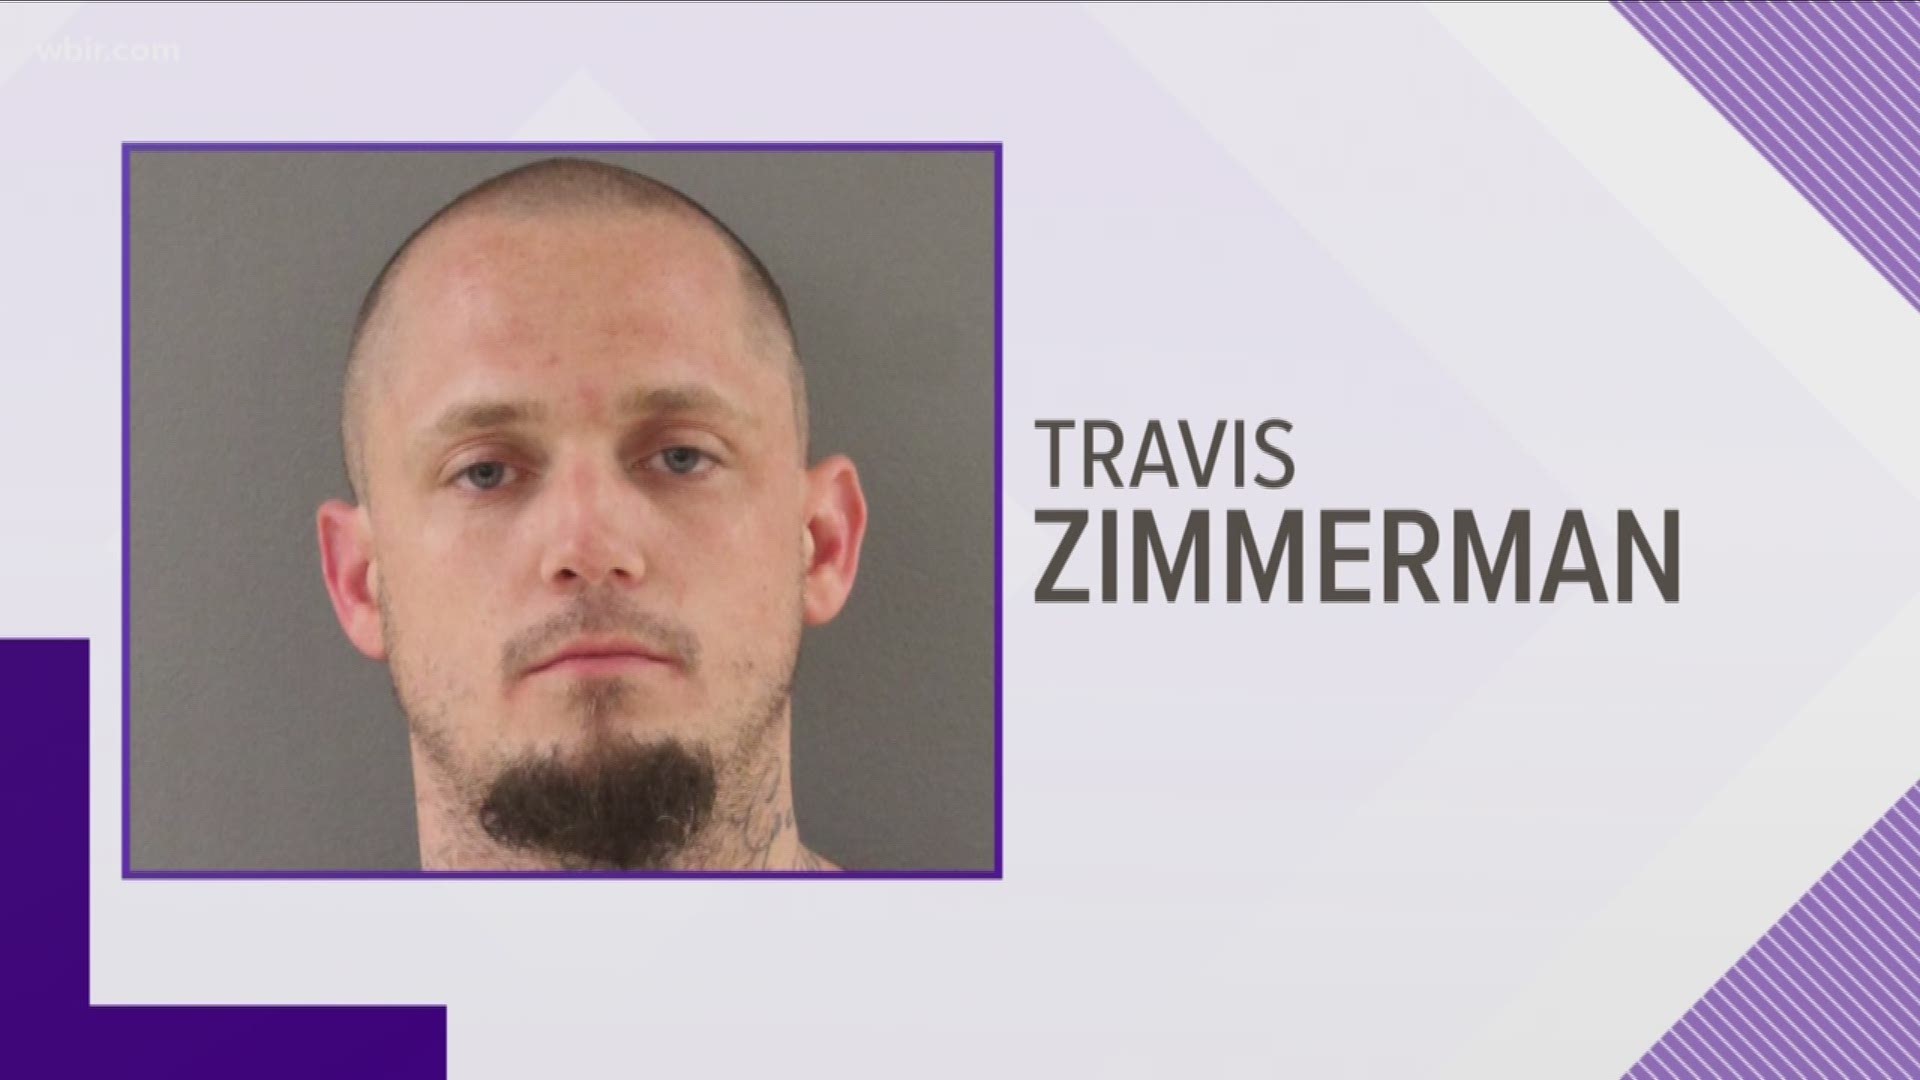 The Knox County Sheriff's Office said Travis Zimmerman is charged with assault and evading arrest after a chase turned into a fiery crash Sunday.